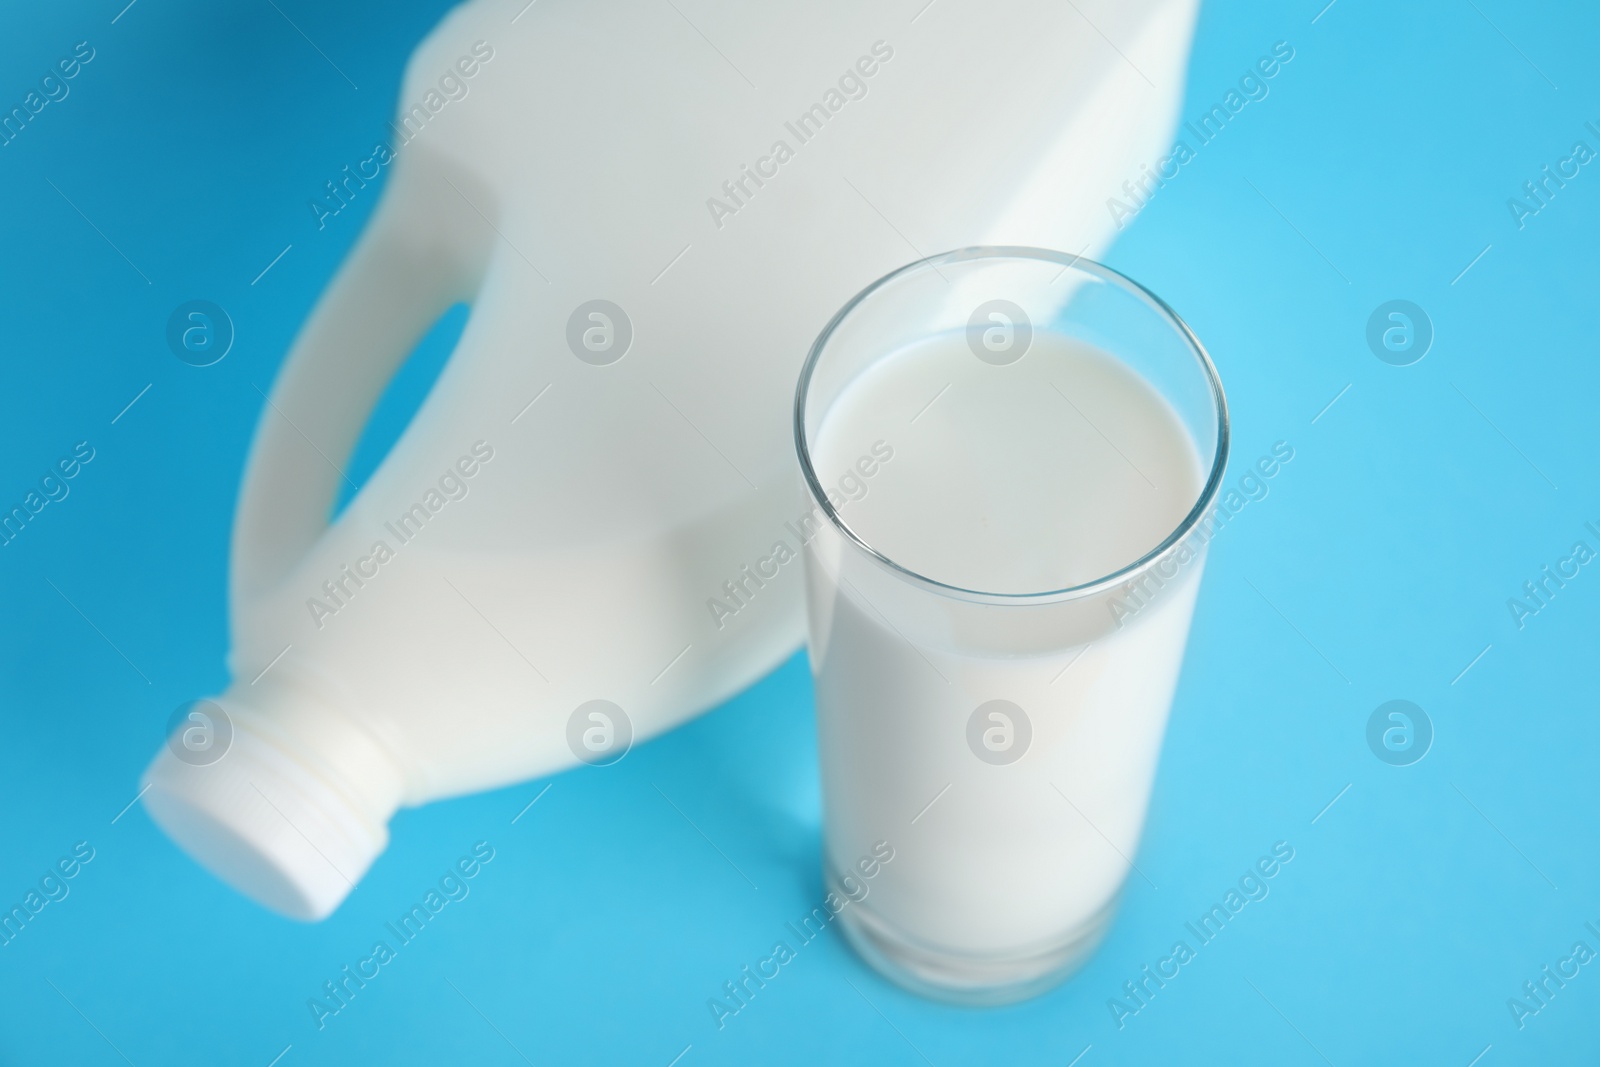 Photo of Gallon bottle of milk and glass on light blue background